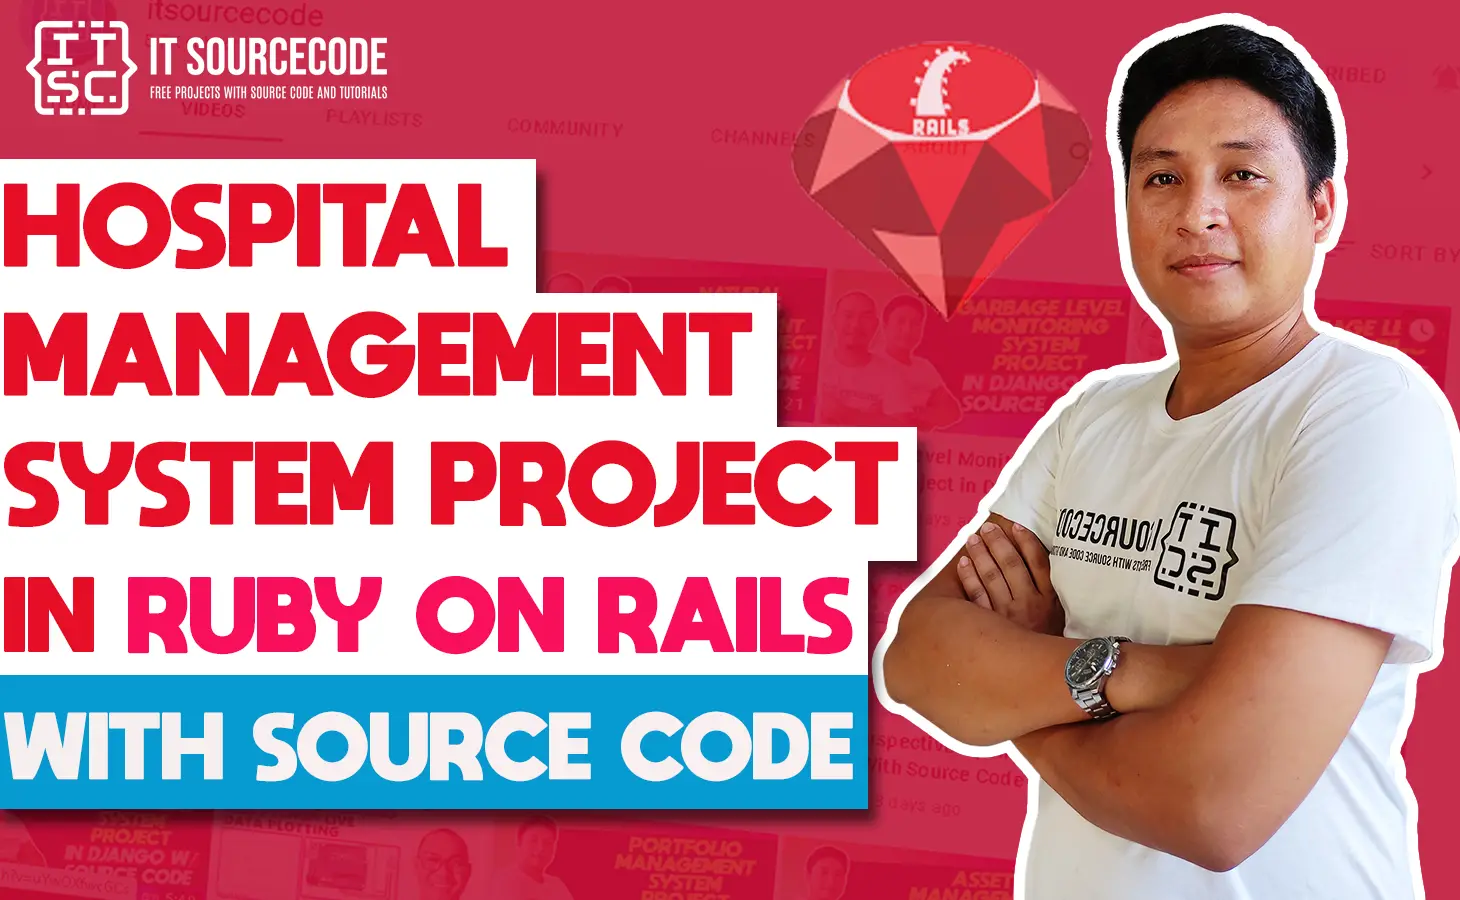 Hospital Management System Project in Ruby on Rails with Source Code